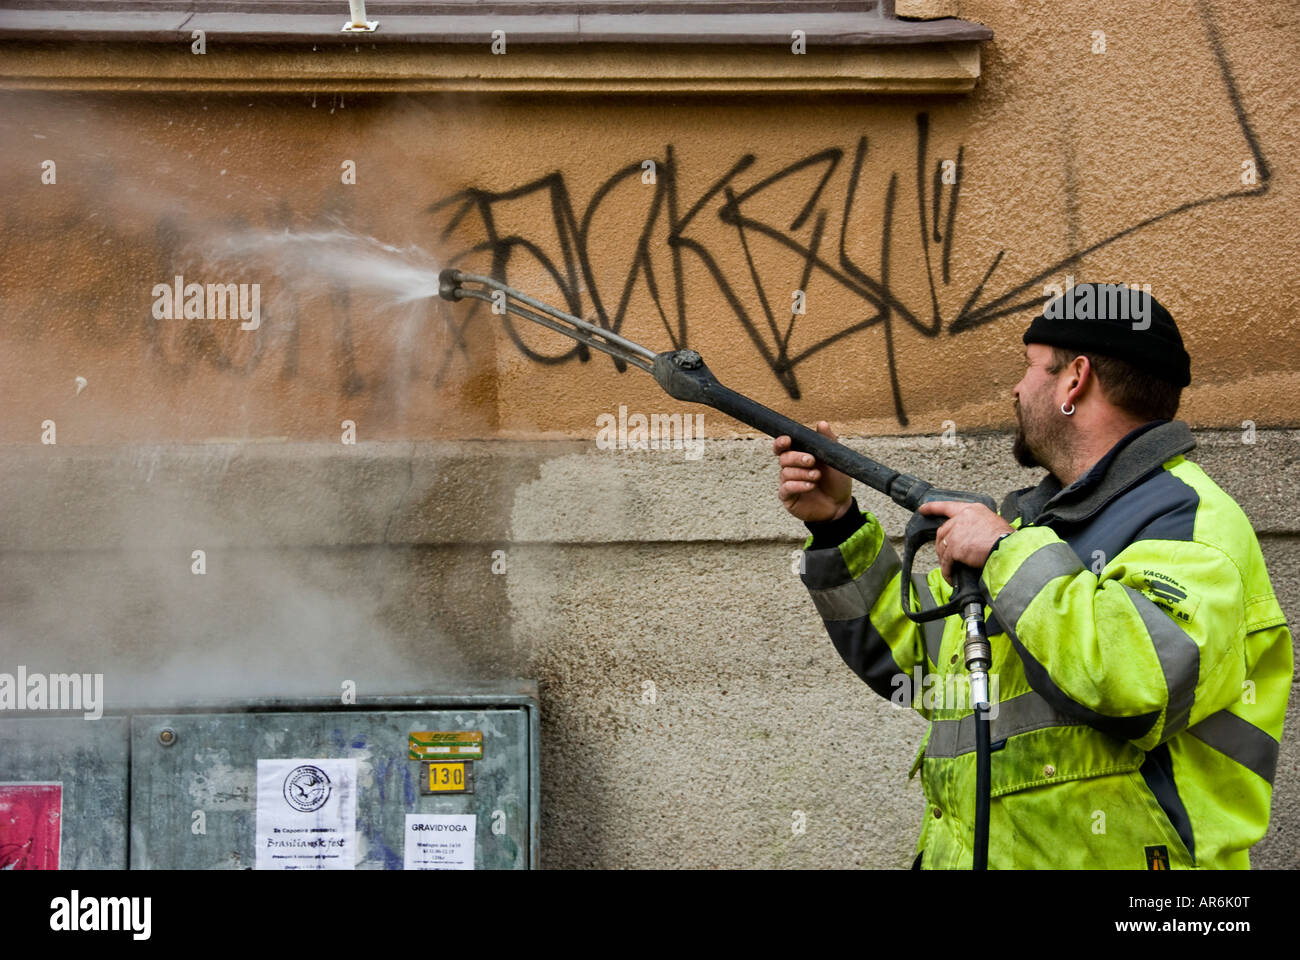 A sanitation worker tries to clean away graffiti from a wall with a high pressure water hose Stock Photo